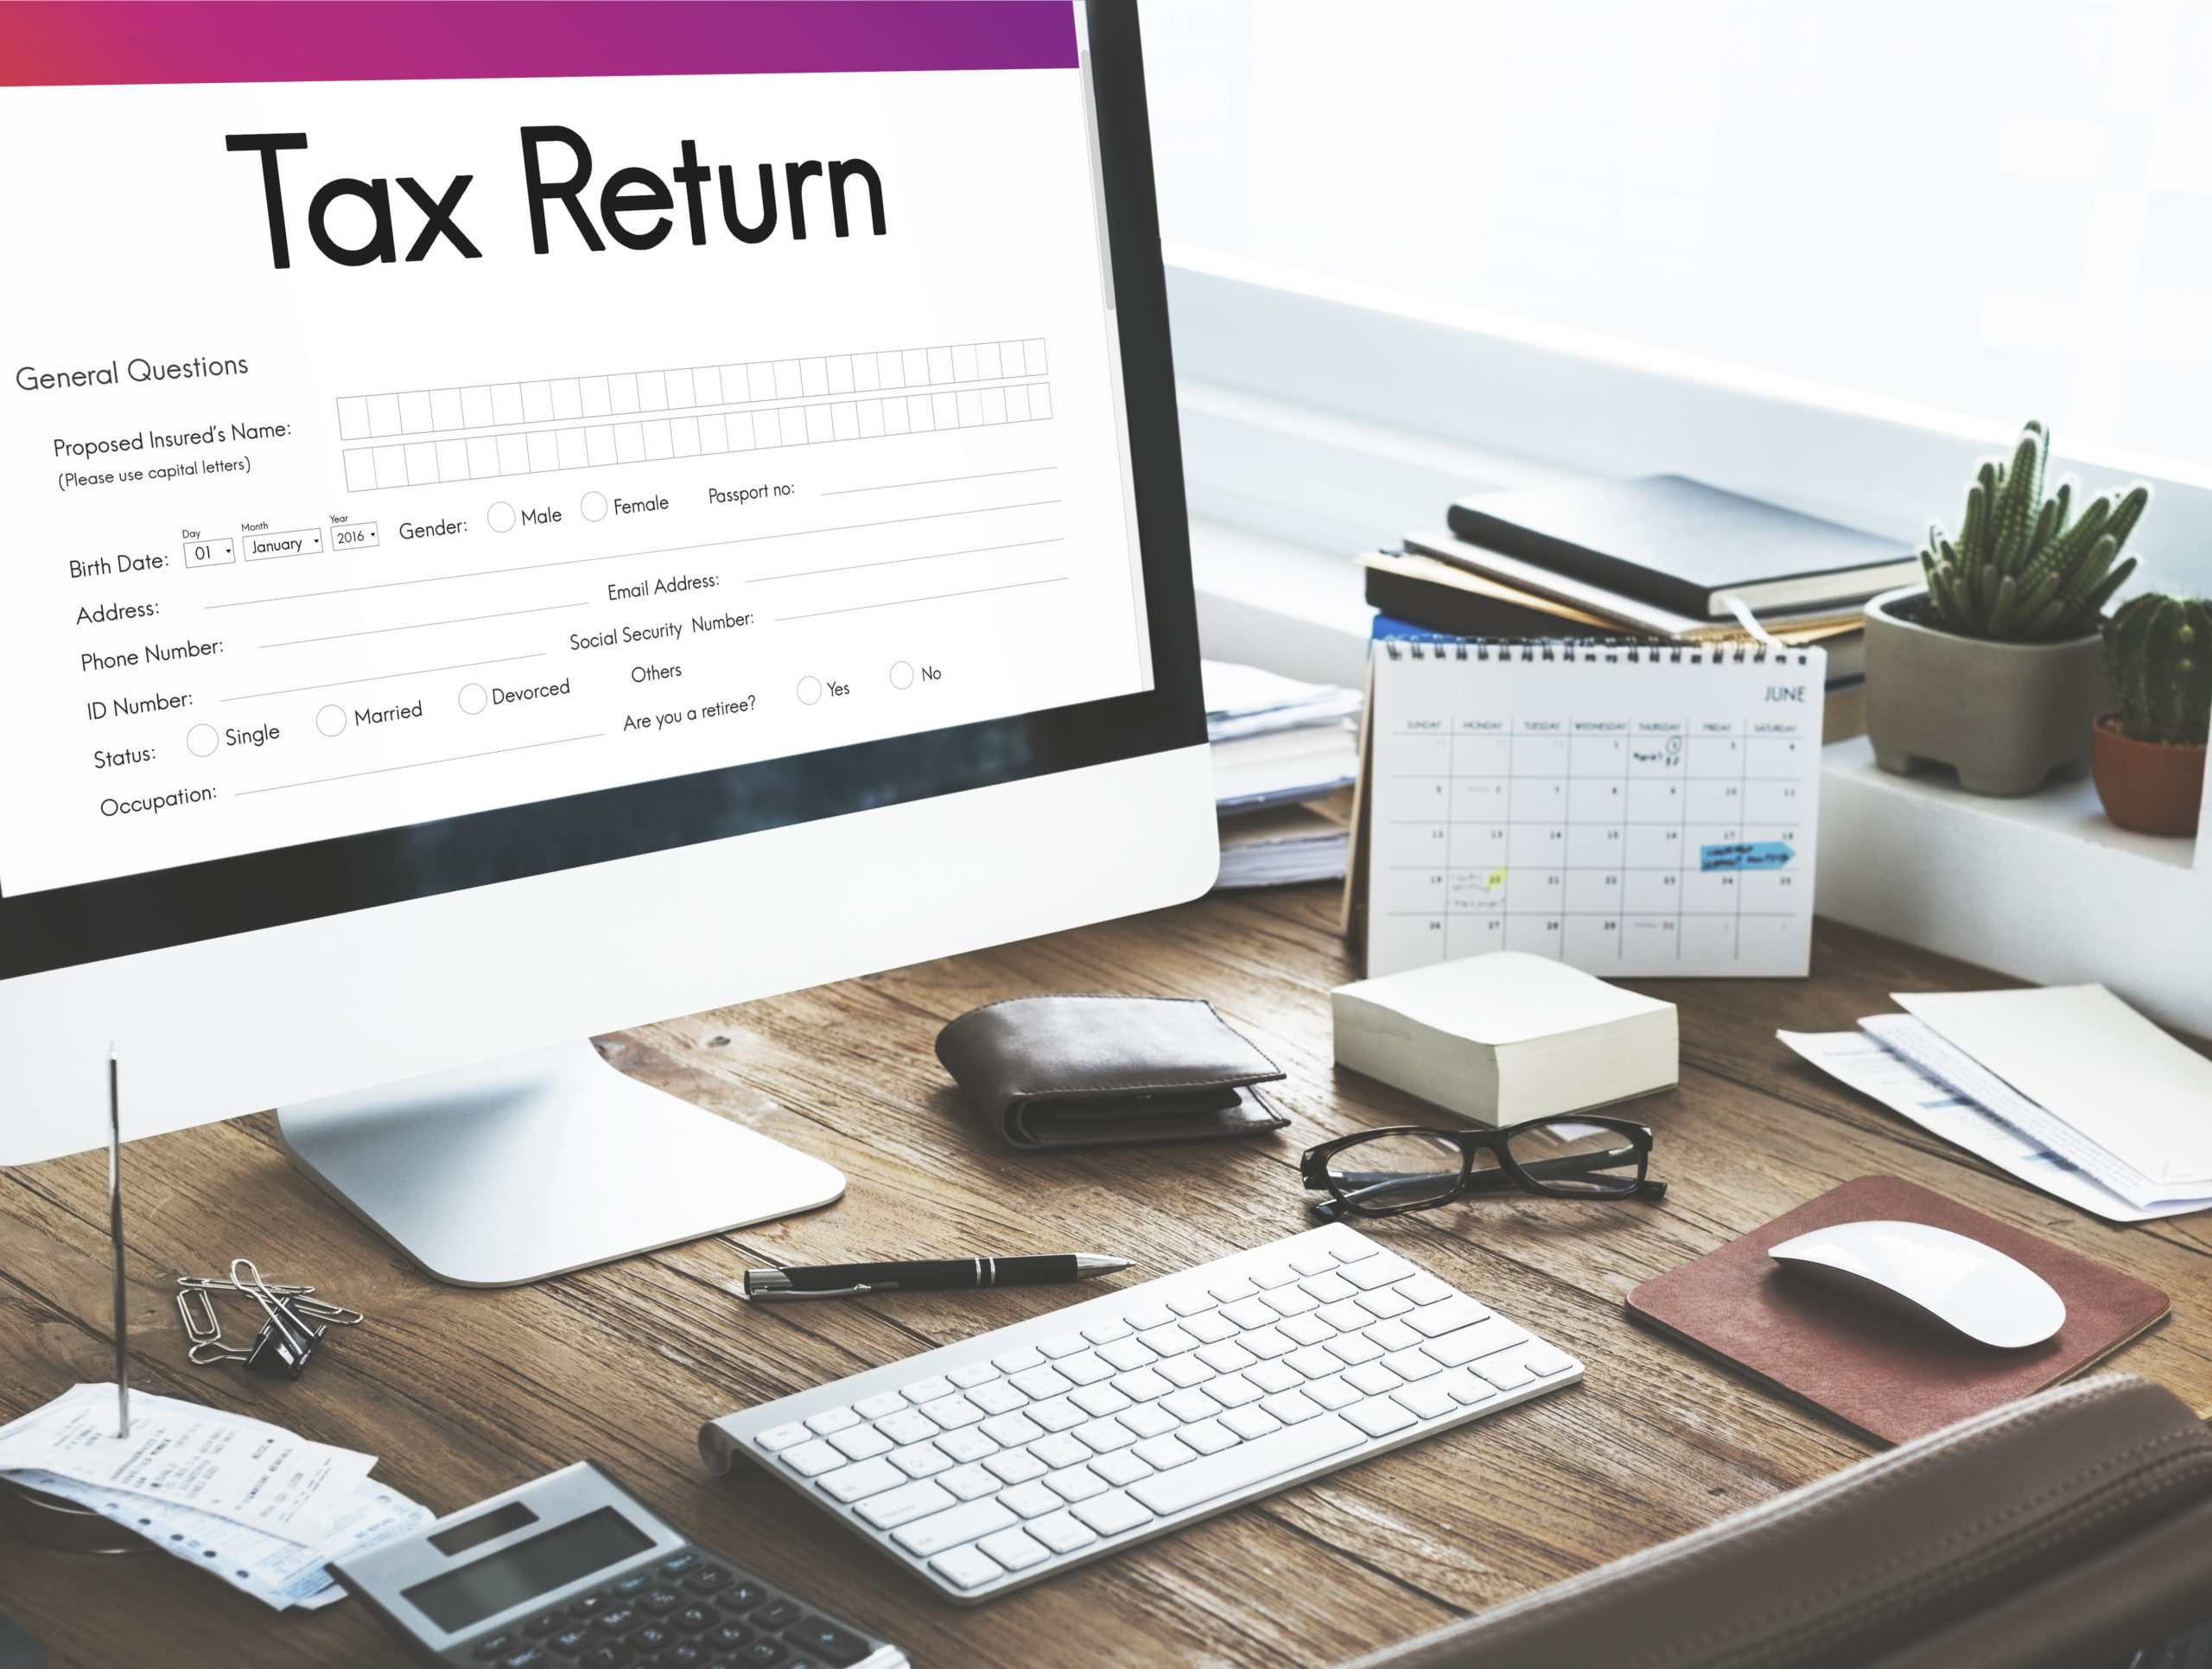 Tax Filing Requirements for 509a3